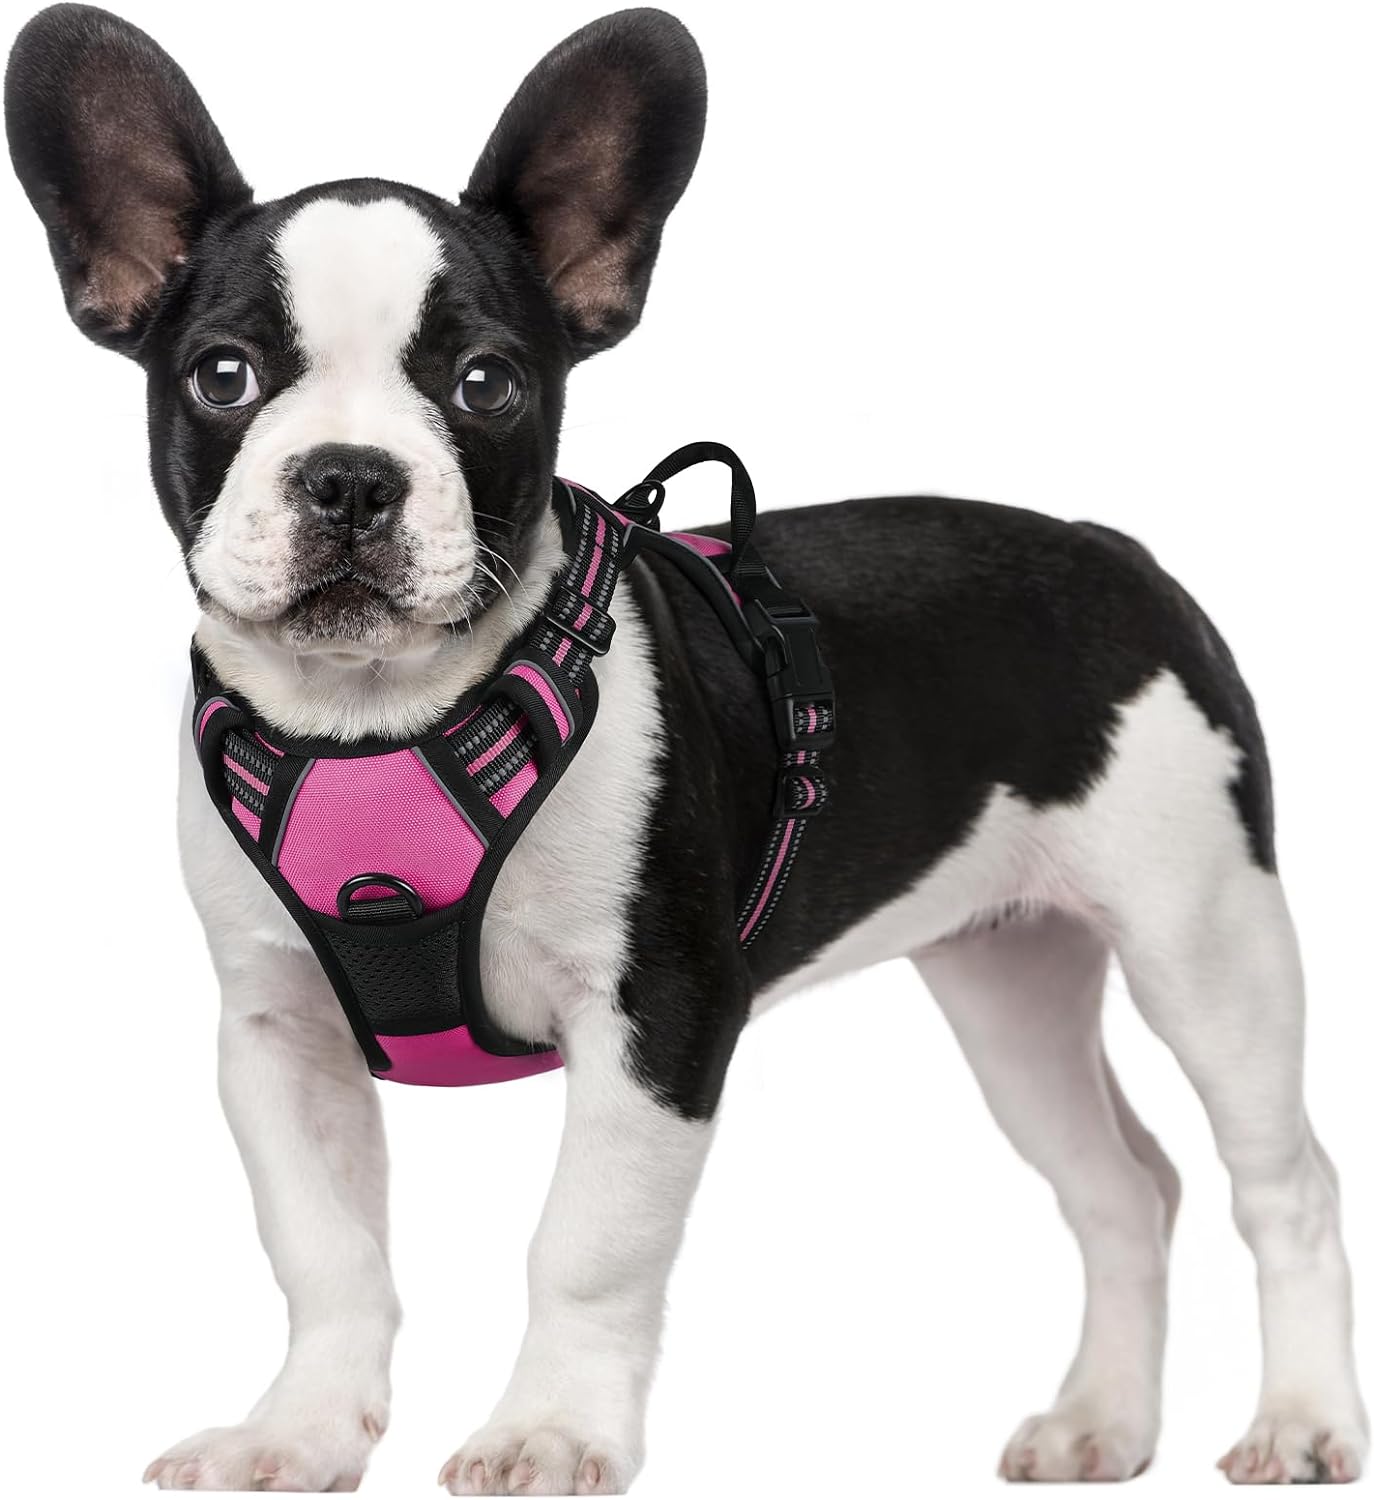 rabbitgoo Dog Harness, No-Pull Pet Harness with 2 Leash Clips, Adjustable Soft Padded Dog Vest, Reflective No-Choke Pet Oxford Vest with Easy Control Handle for Small Dogs, Hot Pink, S